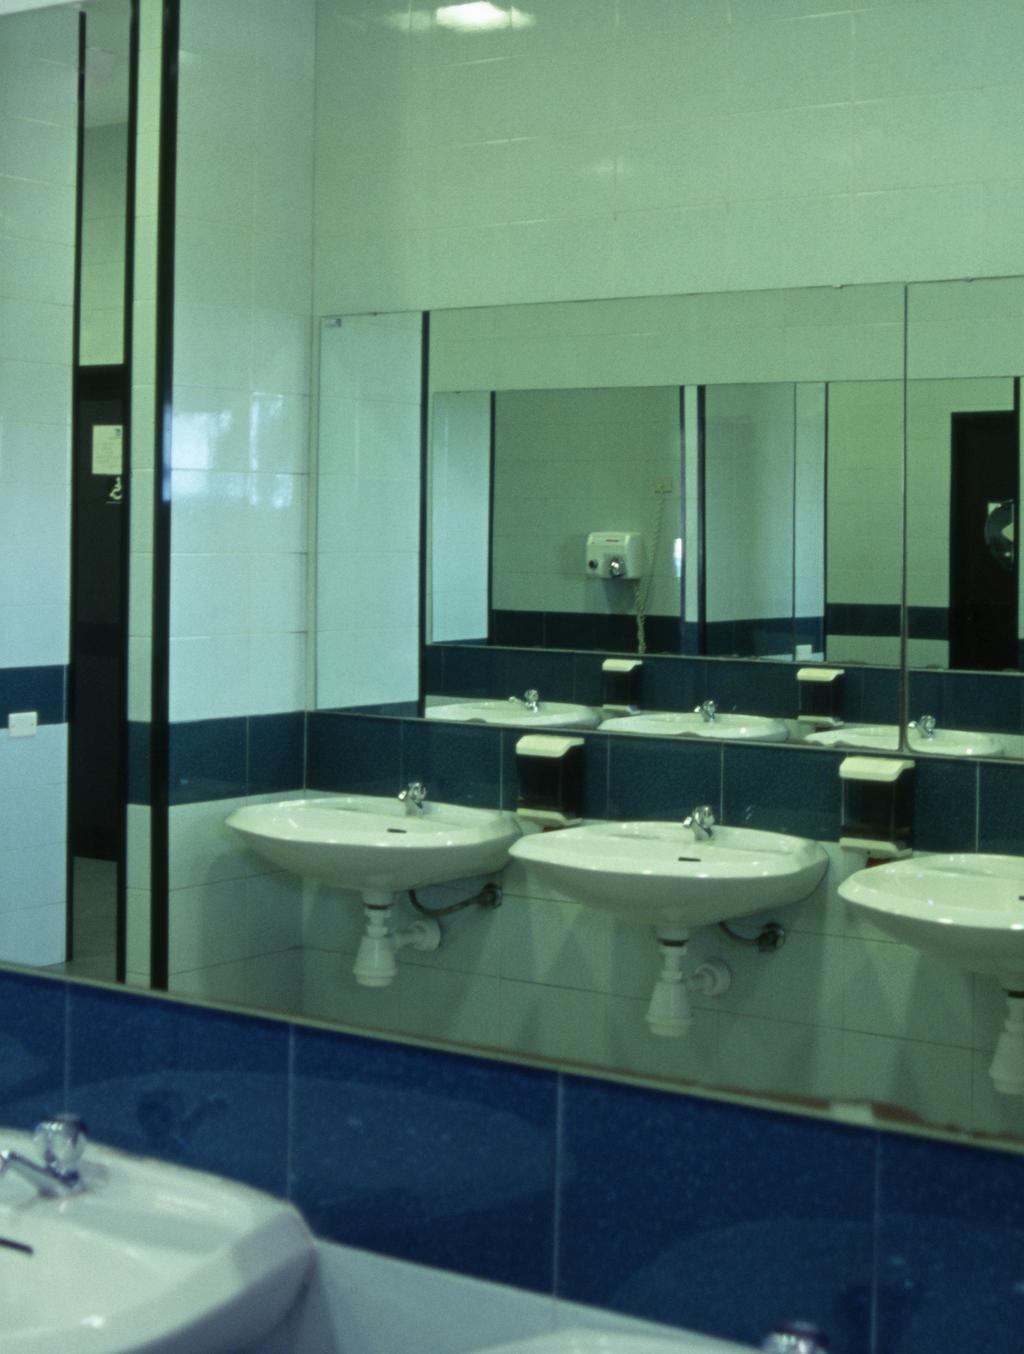 The cleanliness of your restroom is vital to the health of your business Patrons judge the cleanliness of a facility by its restroom 91% of respondents say an unclean restroom gives them a